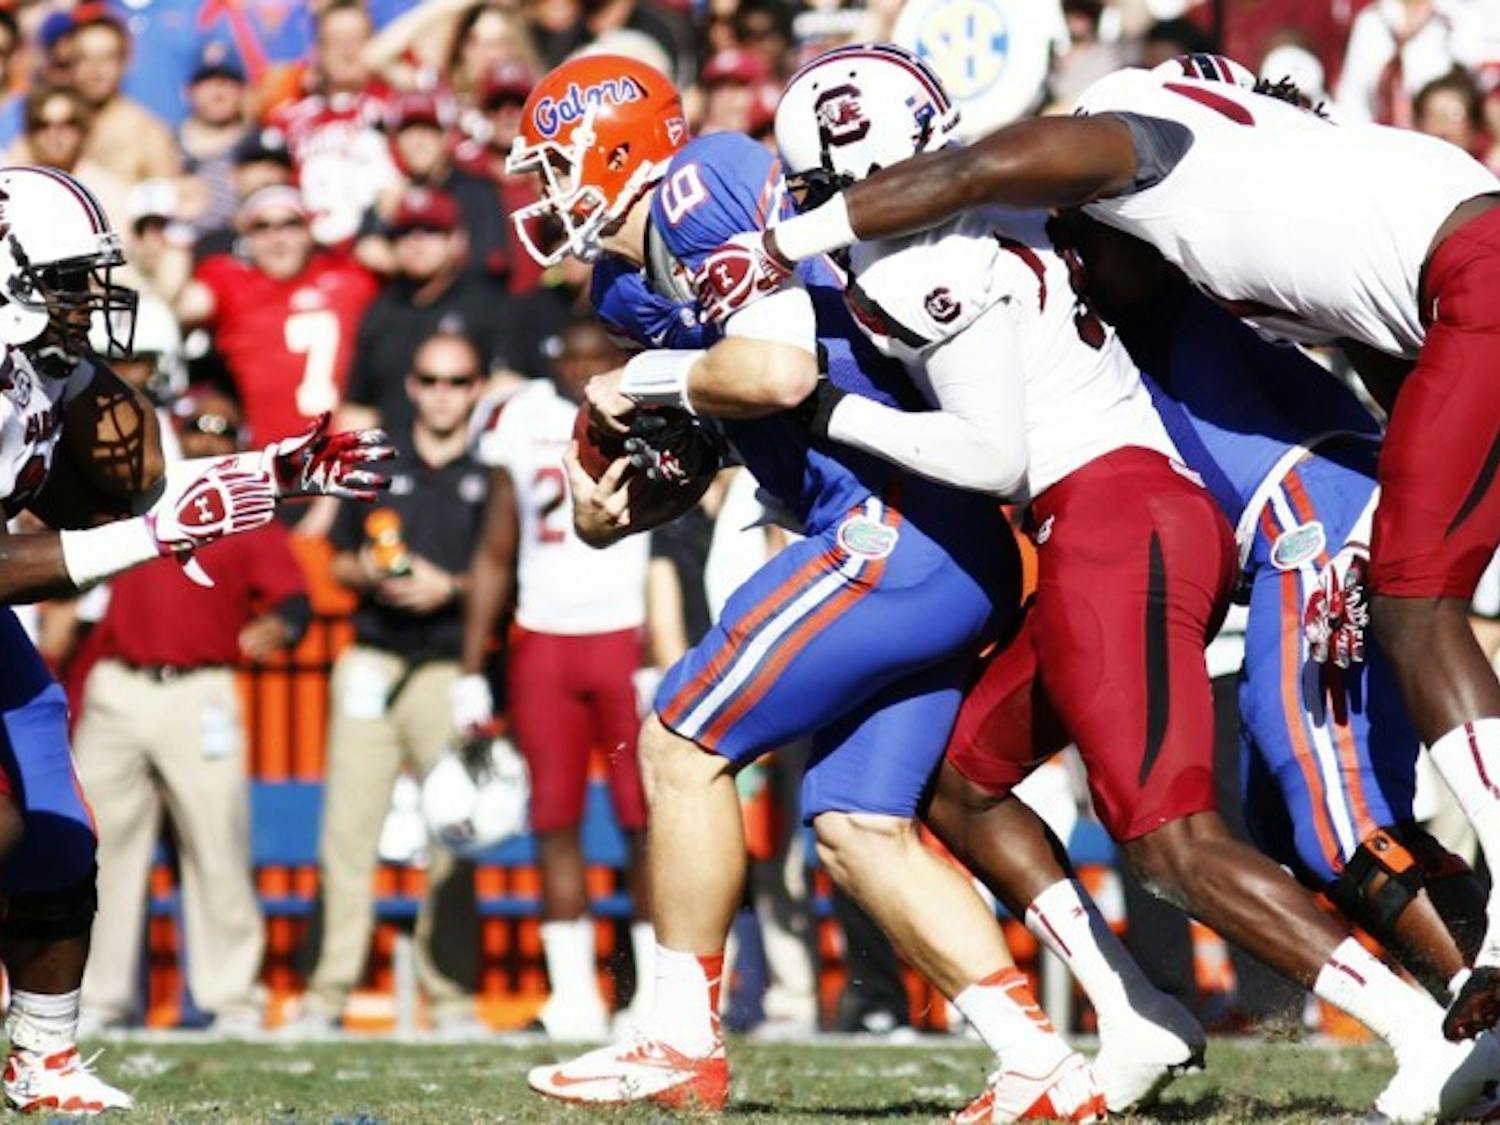 Jeff Driskel gets sacked during UF’s 44-11 win against South Carolina on Saturday in The Swamp. Although Driskel failed to eclipse 100 passing yards for the third straight game, he has only one interception in 2012.
